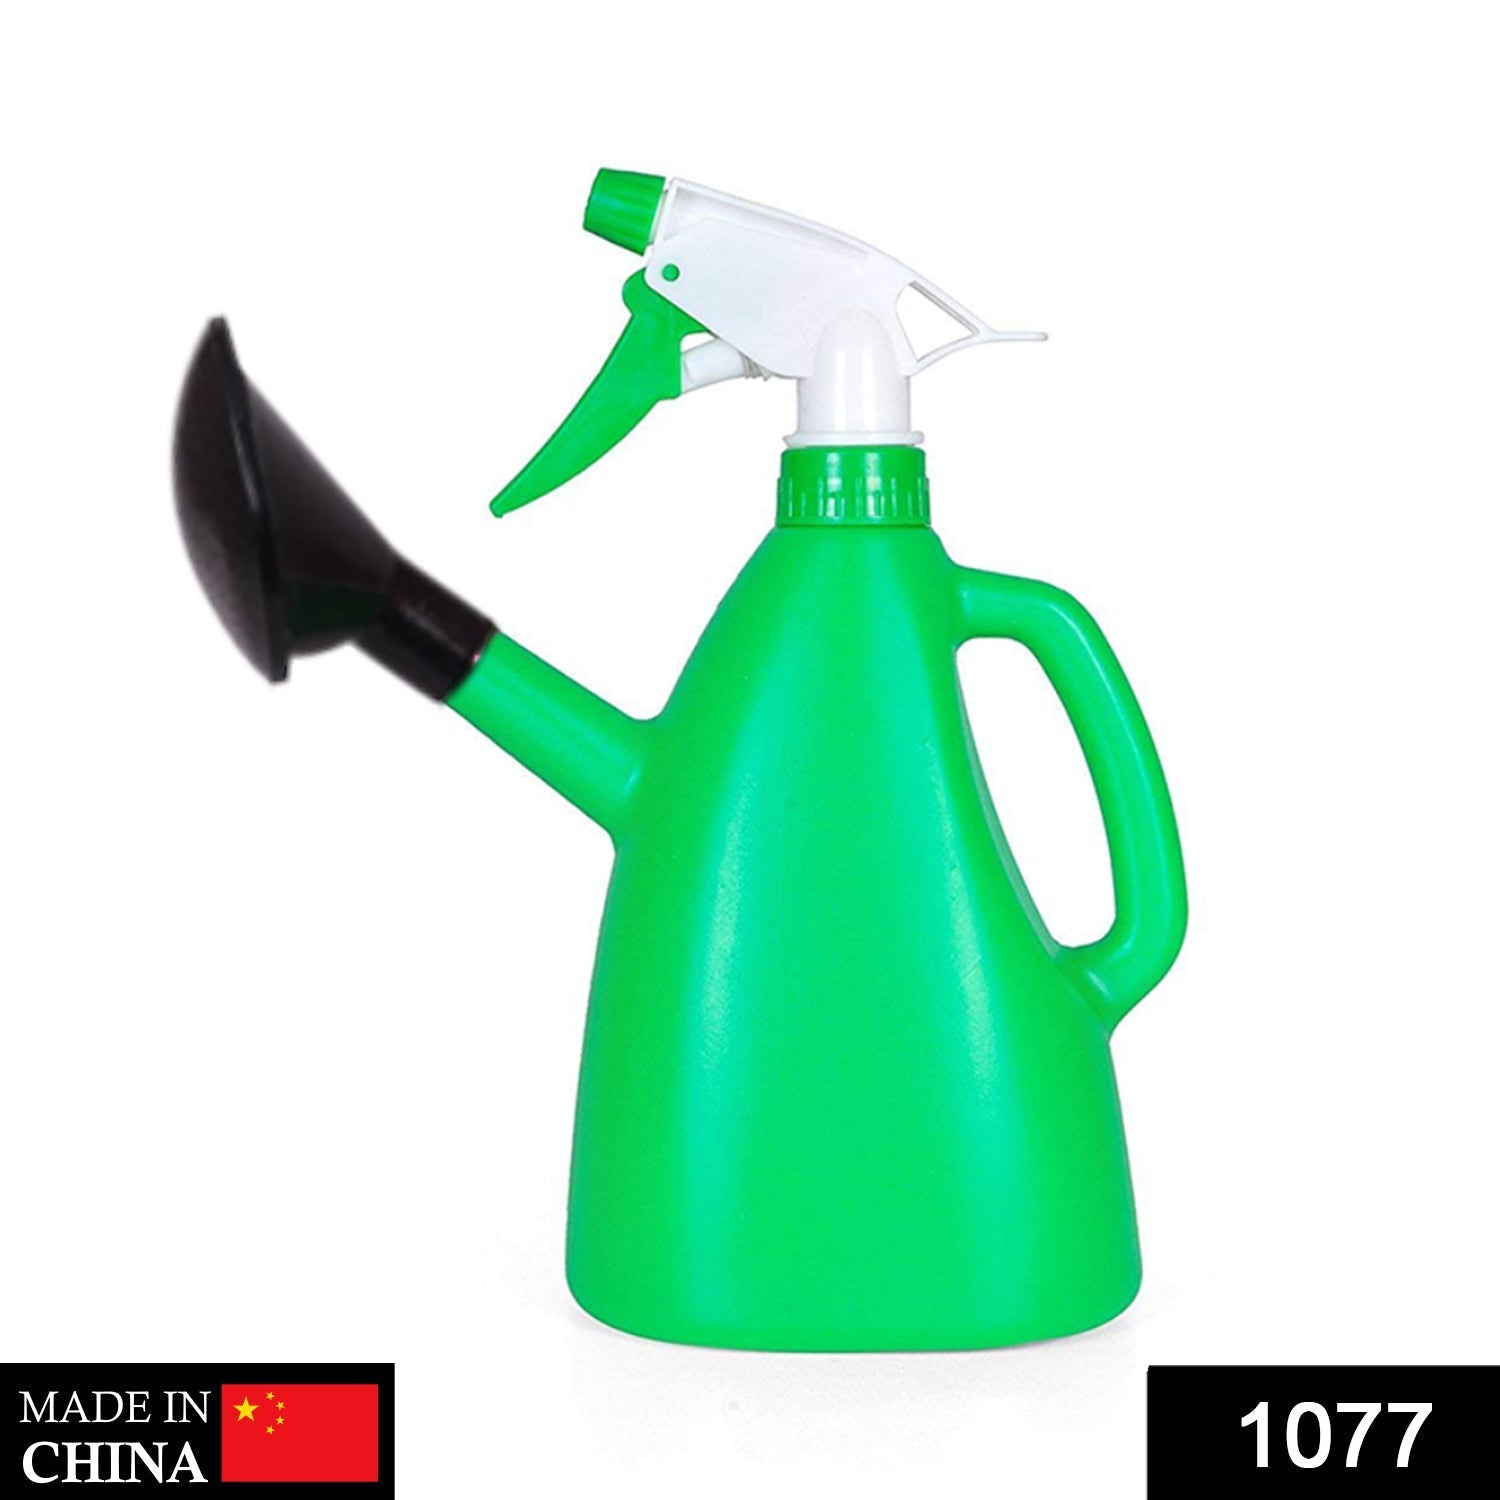 2-in-1 Watering Can with Hand Triggered Sprayer for Plants